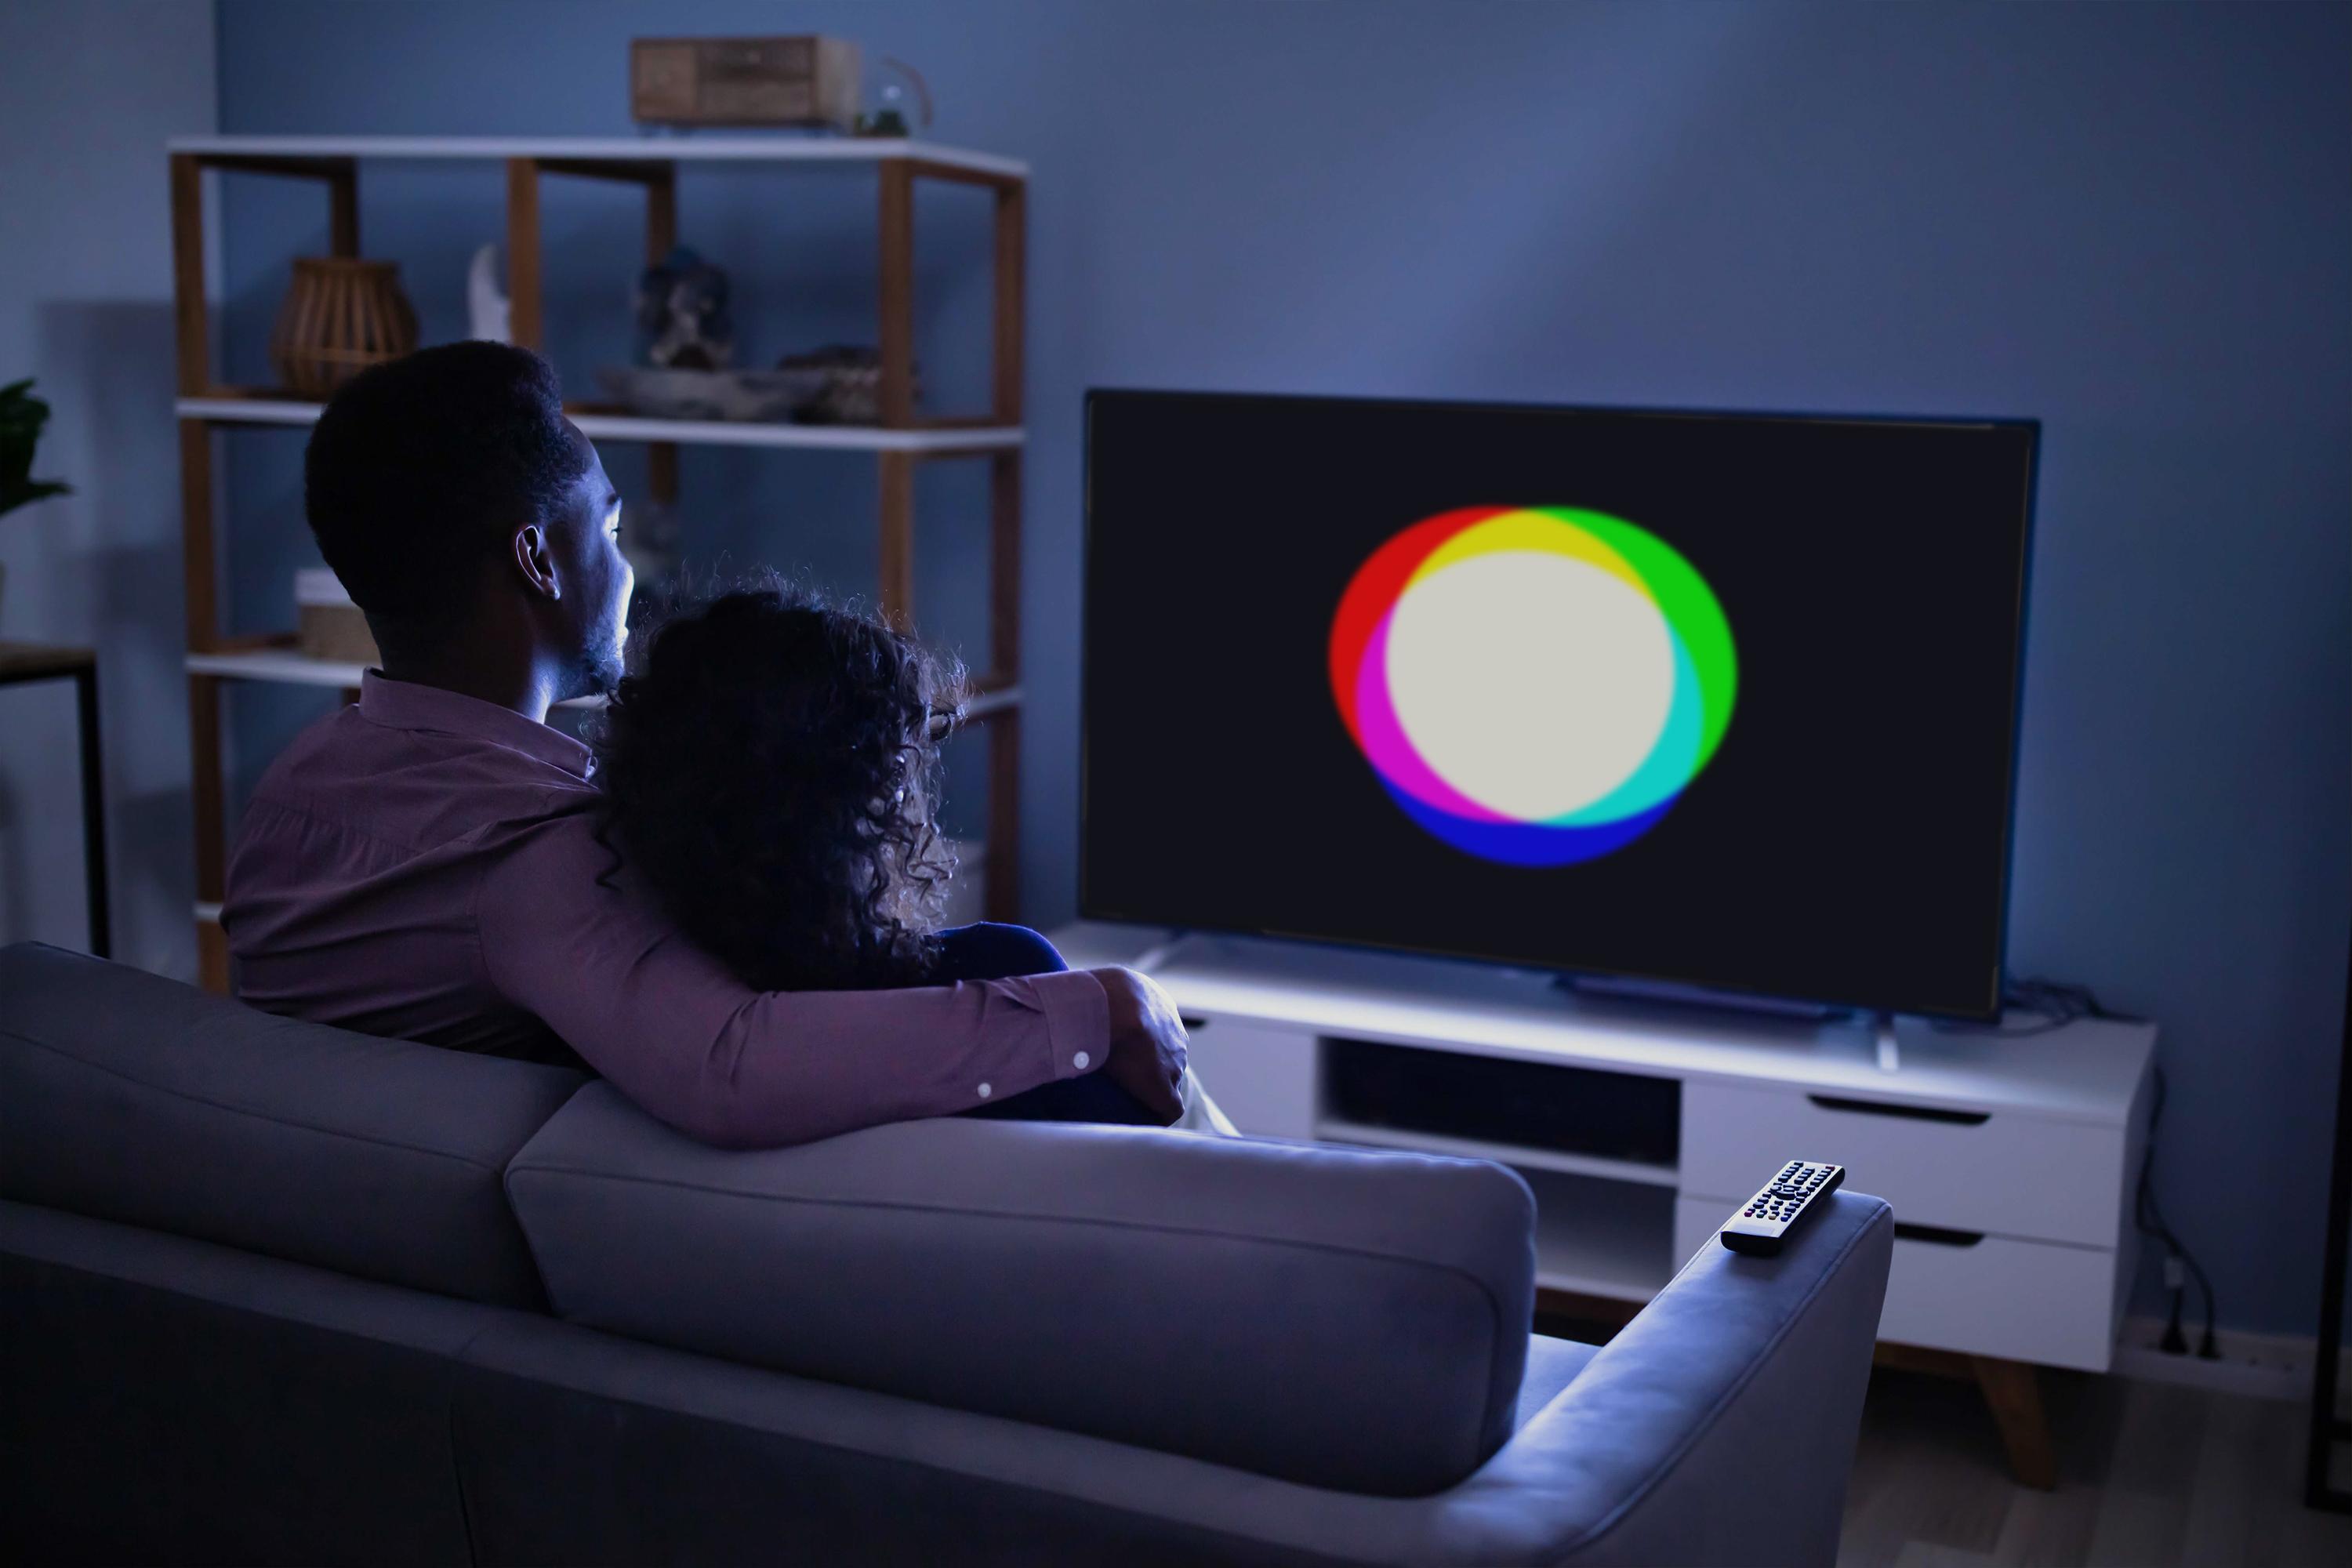 Couple watching TV in living room with Finecast logo on TV